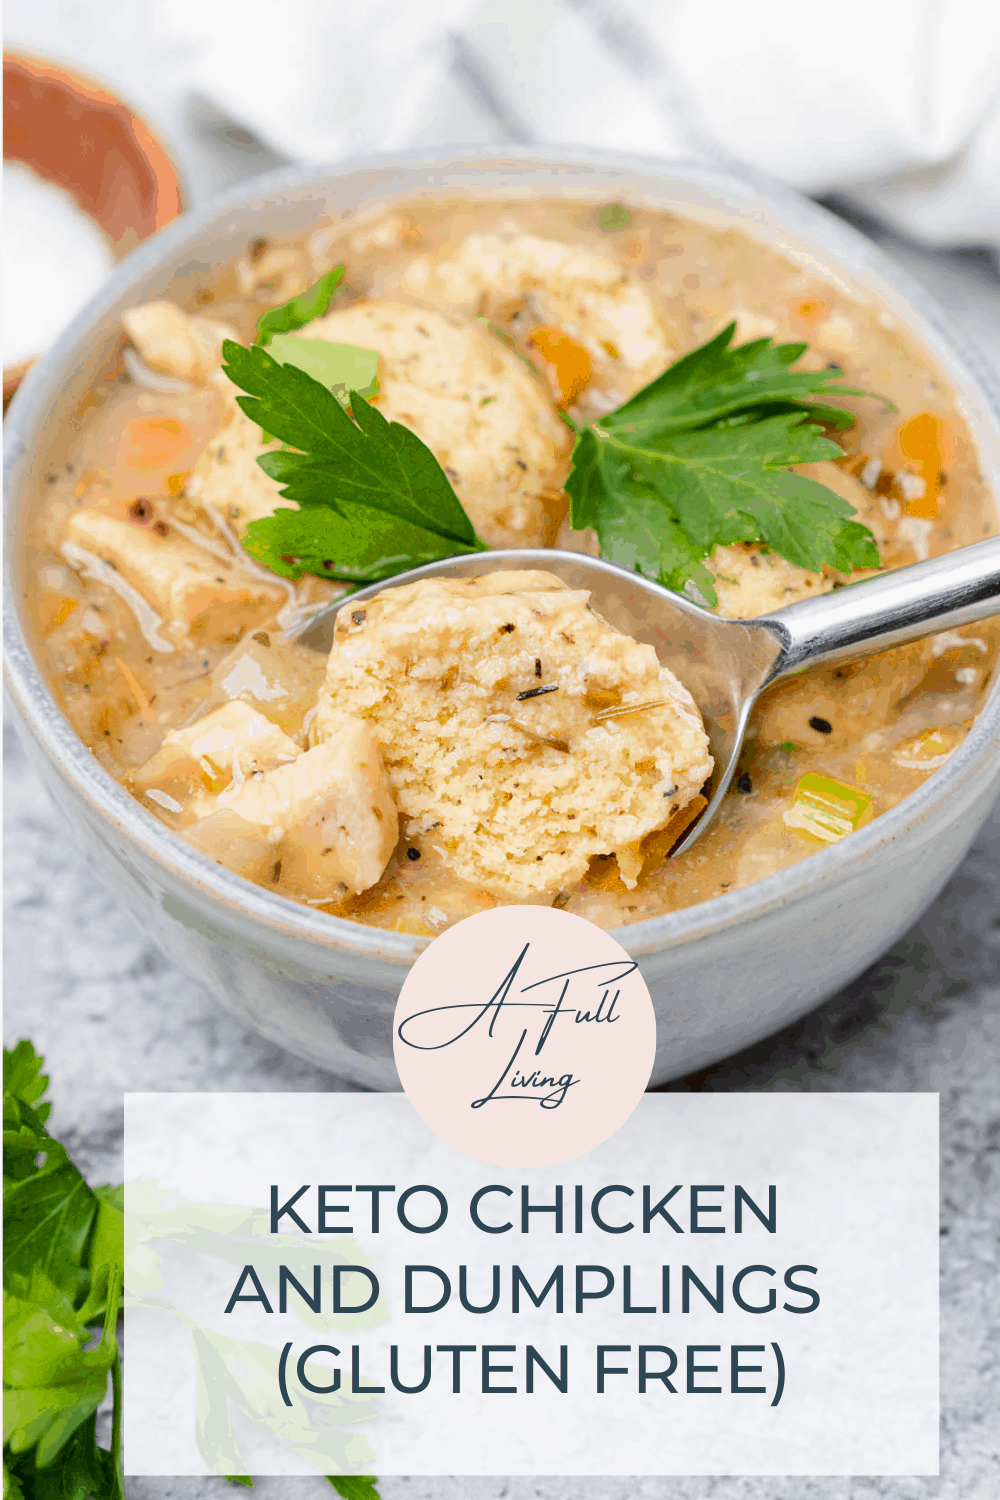 Keto Chicken and Dumplings (Gluten Free) graphic with text